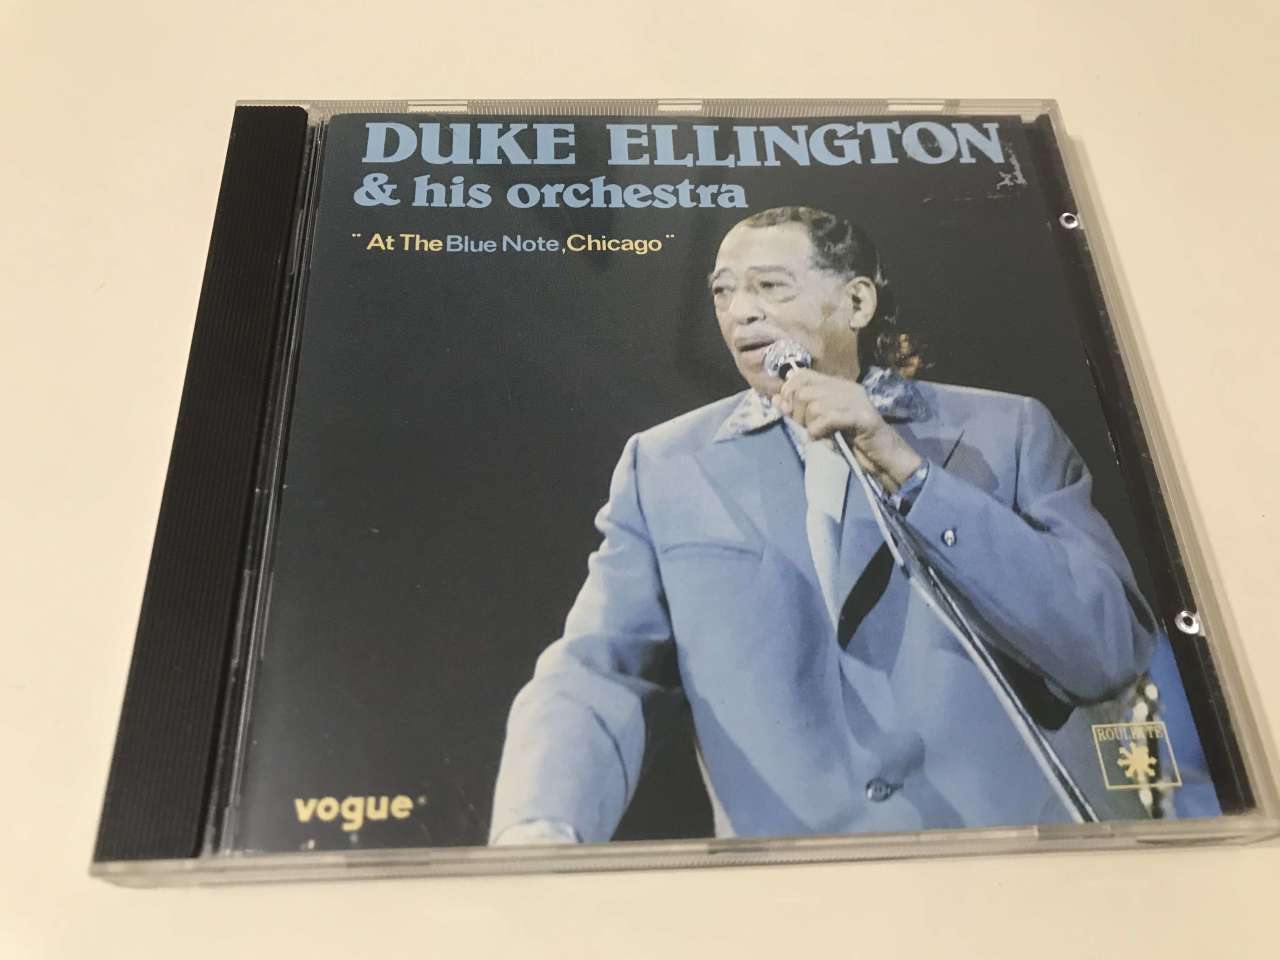 Duke Ellington & His Orchestra – At The Blue Note, Chicago